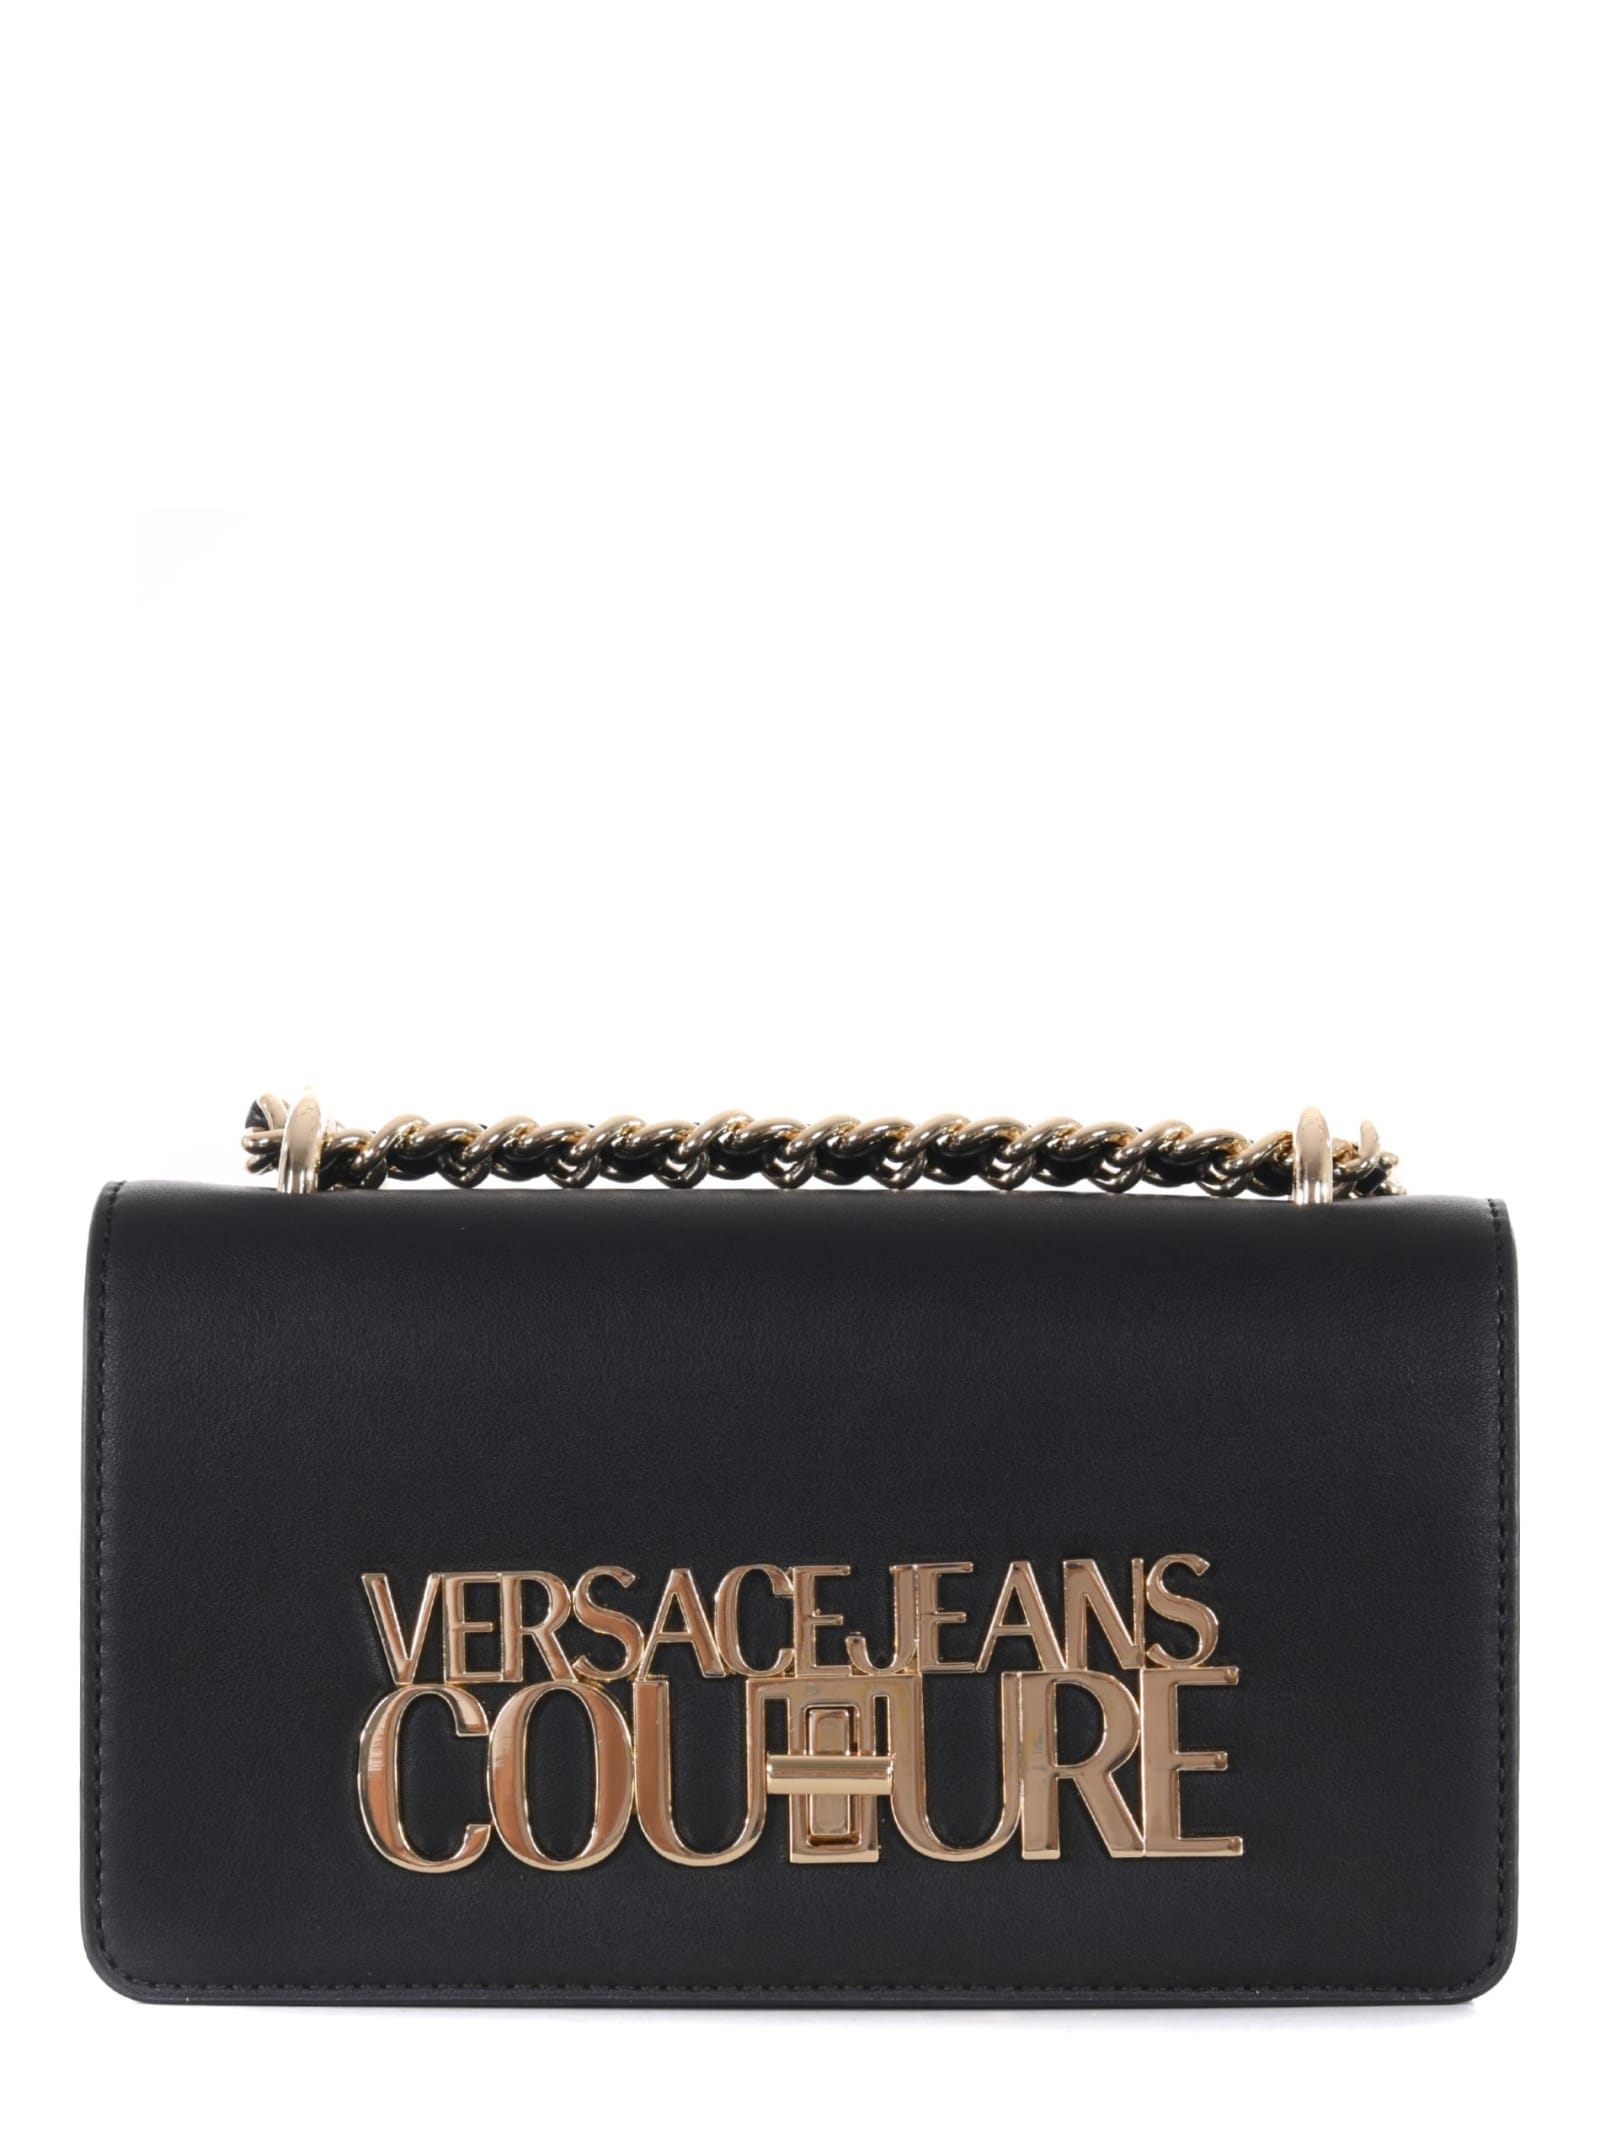 Versace Jeans Couture logo Lock Eco-leather Bag